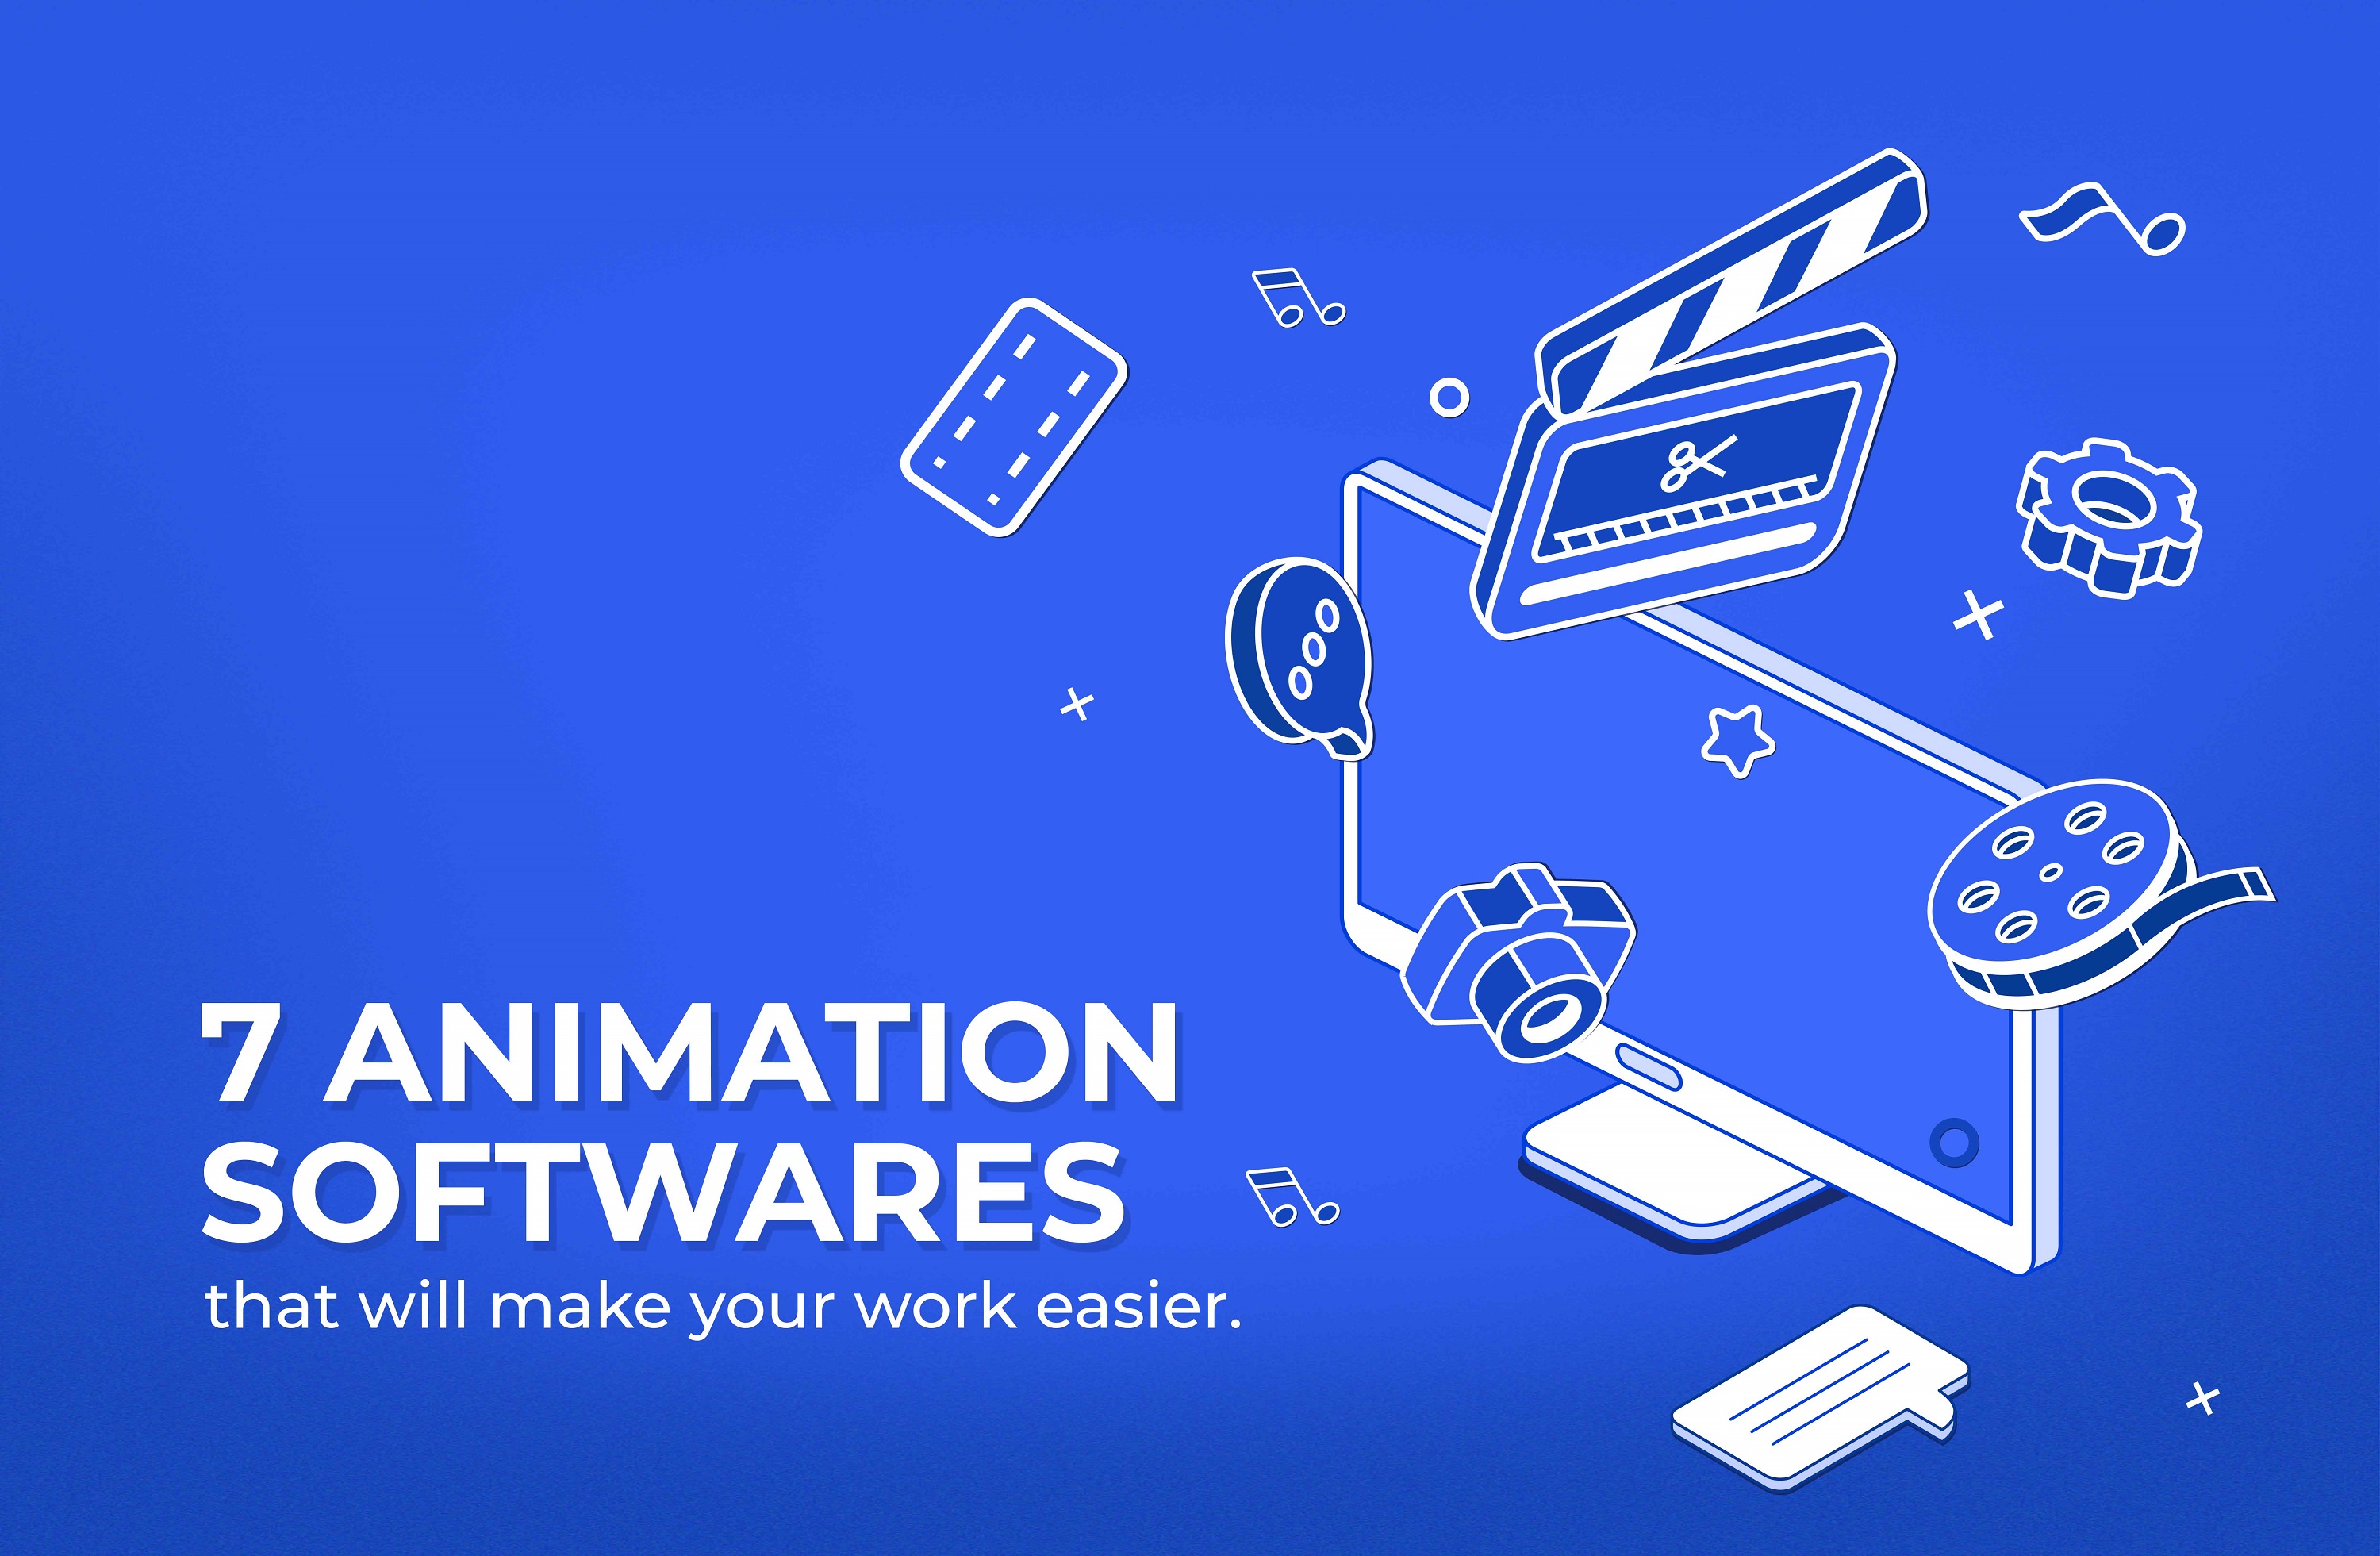 Some of the best software for animators